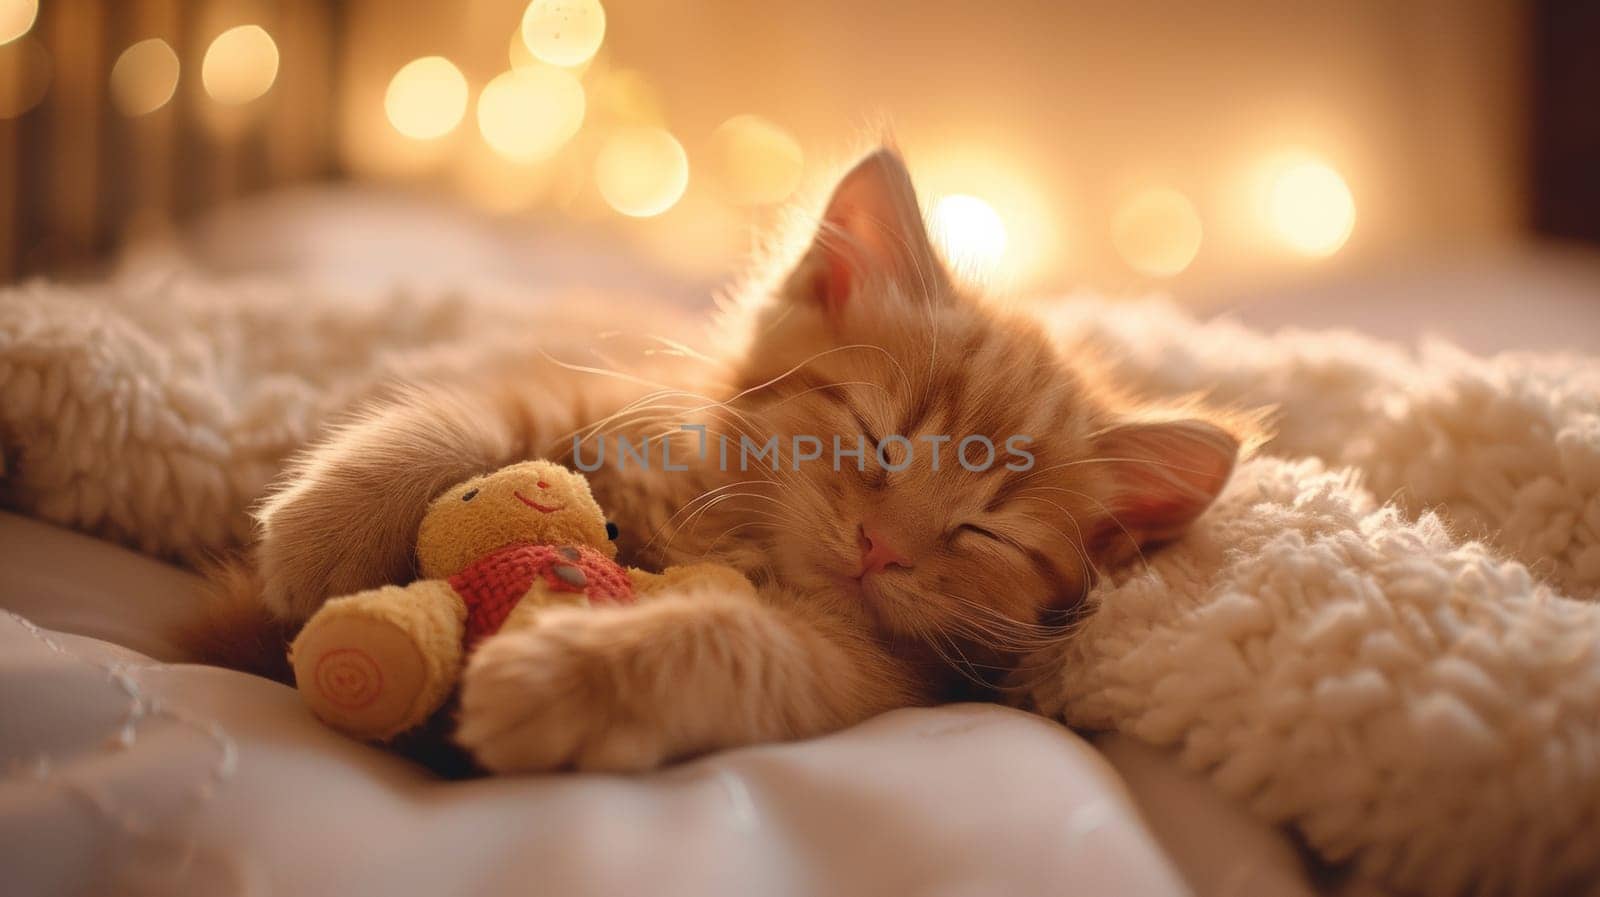 A small kitten sleeping with a teddy bear on top of the bed